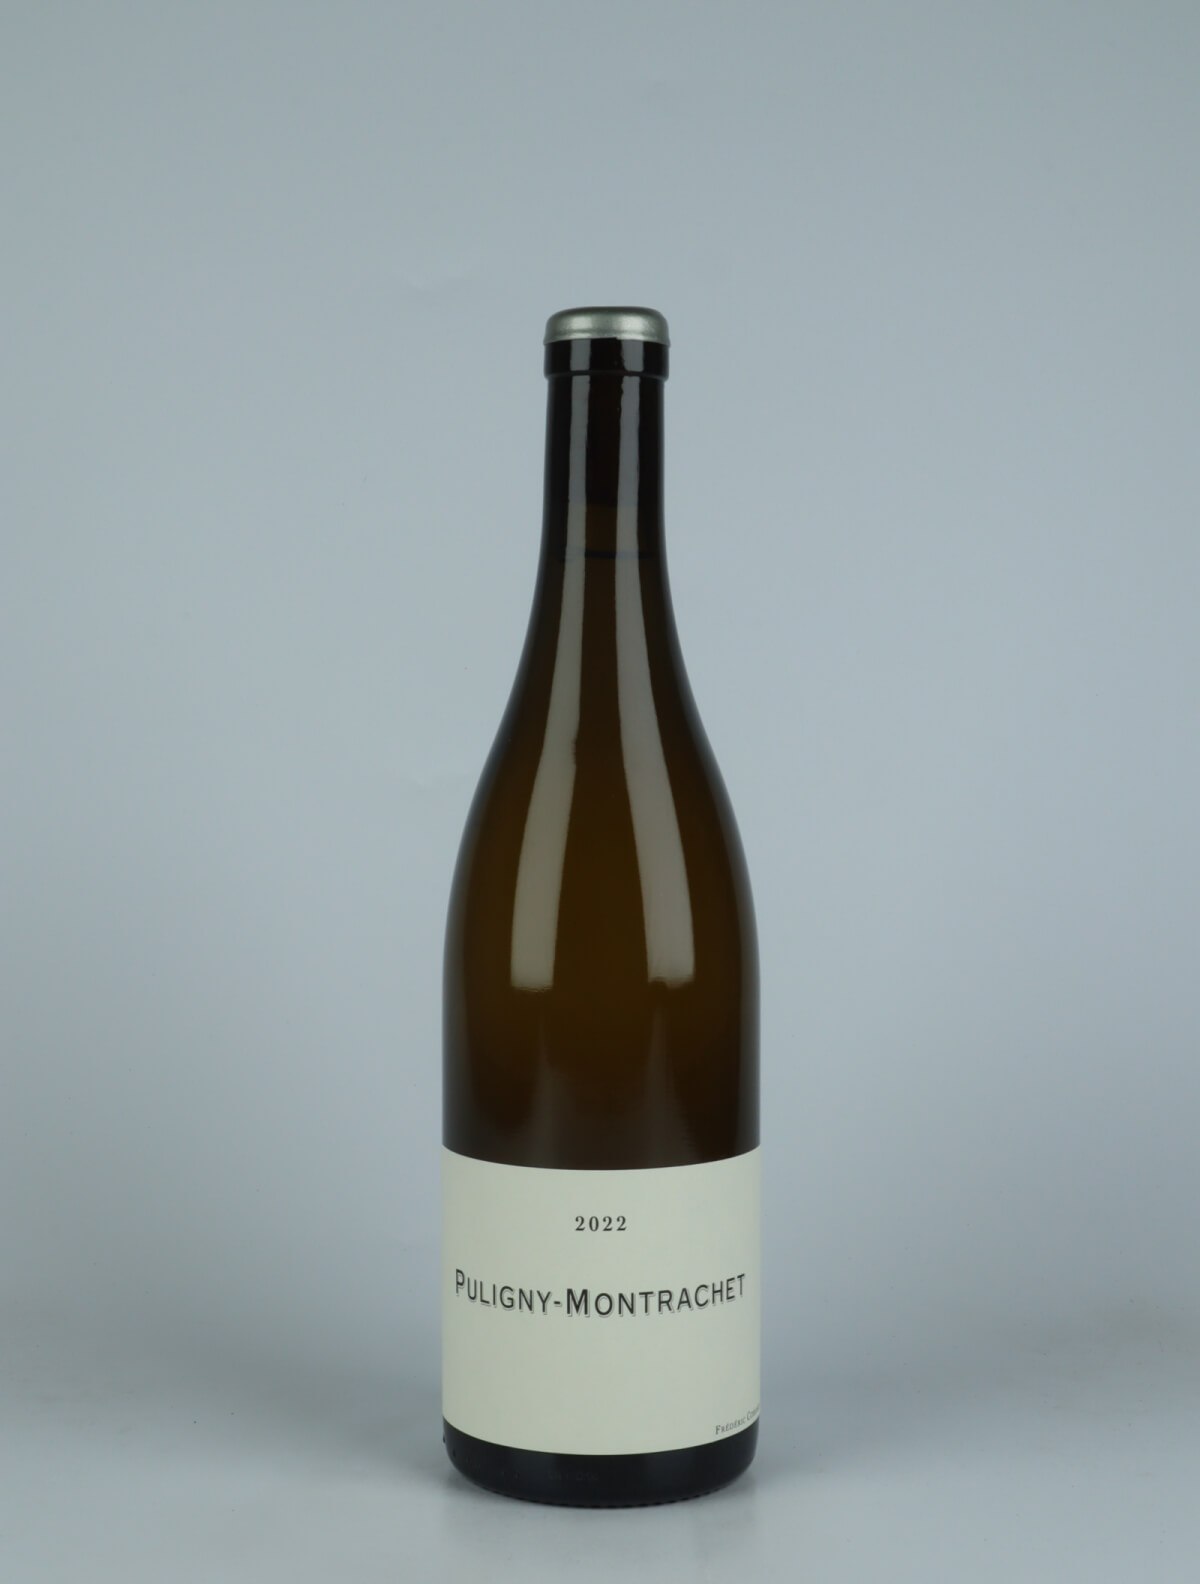 A bottle 2022 Puligny Montrachet White wine from Frédéric Cossard, Burgundy in France